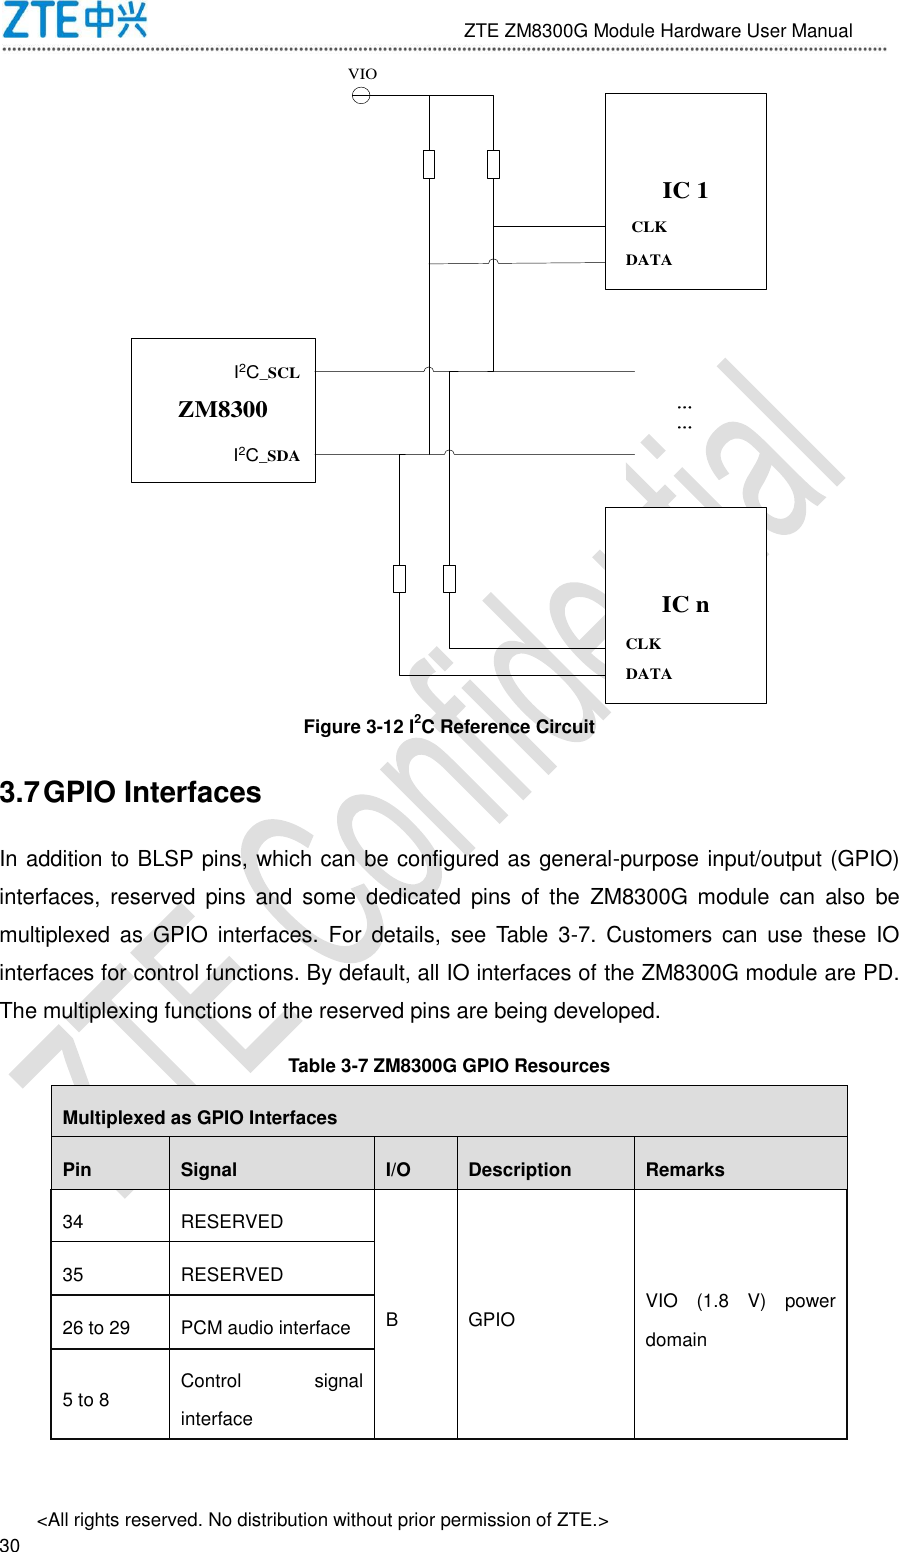                              ZTE ZM8300G Module Hardware User Manual &lt;All rights reserved. No distribution without prior permission of ZTE.&gt;                                                               30 ZM8300I2C_SCLI2C_SDAIC 1IC n……CLKDATAVIOCLKDATA Figure 3-12 I2C Reference Circuit 3.7 GPIO Interfaces In addition to BLSP pins, which can be configured as general-purpose input/output (GPIO) interfaces, reserved  pins  and  some  dedicated  pins of  the  ZM8300G  module  can  also  be multiplexed as  GPIO  interfaces.  For  details,  see  Table  3-7.  Customers  can  use  these  IO interfaces for control functions. By default, all IO interfaces of the ZM8300G module are PD. The multiplexing functions of the reserved pins are being developed. Table 3-7 ZM8300G GPIO Resources Multiplexed as GPIO Interfaces Pin Signal I/O Description Remarks 34 RESERVED B GPIO VIO  (1.8  V)  power domain 35 RESERVED 26 to 29 PCM audio interface 5 to 8 Control  signal interface 